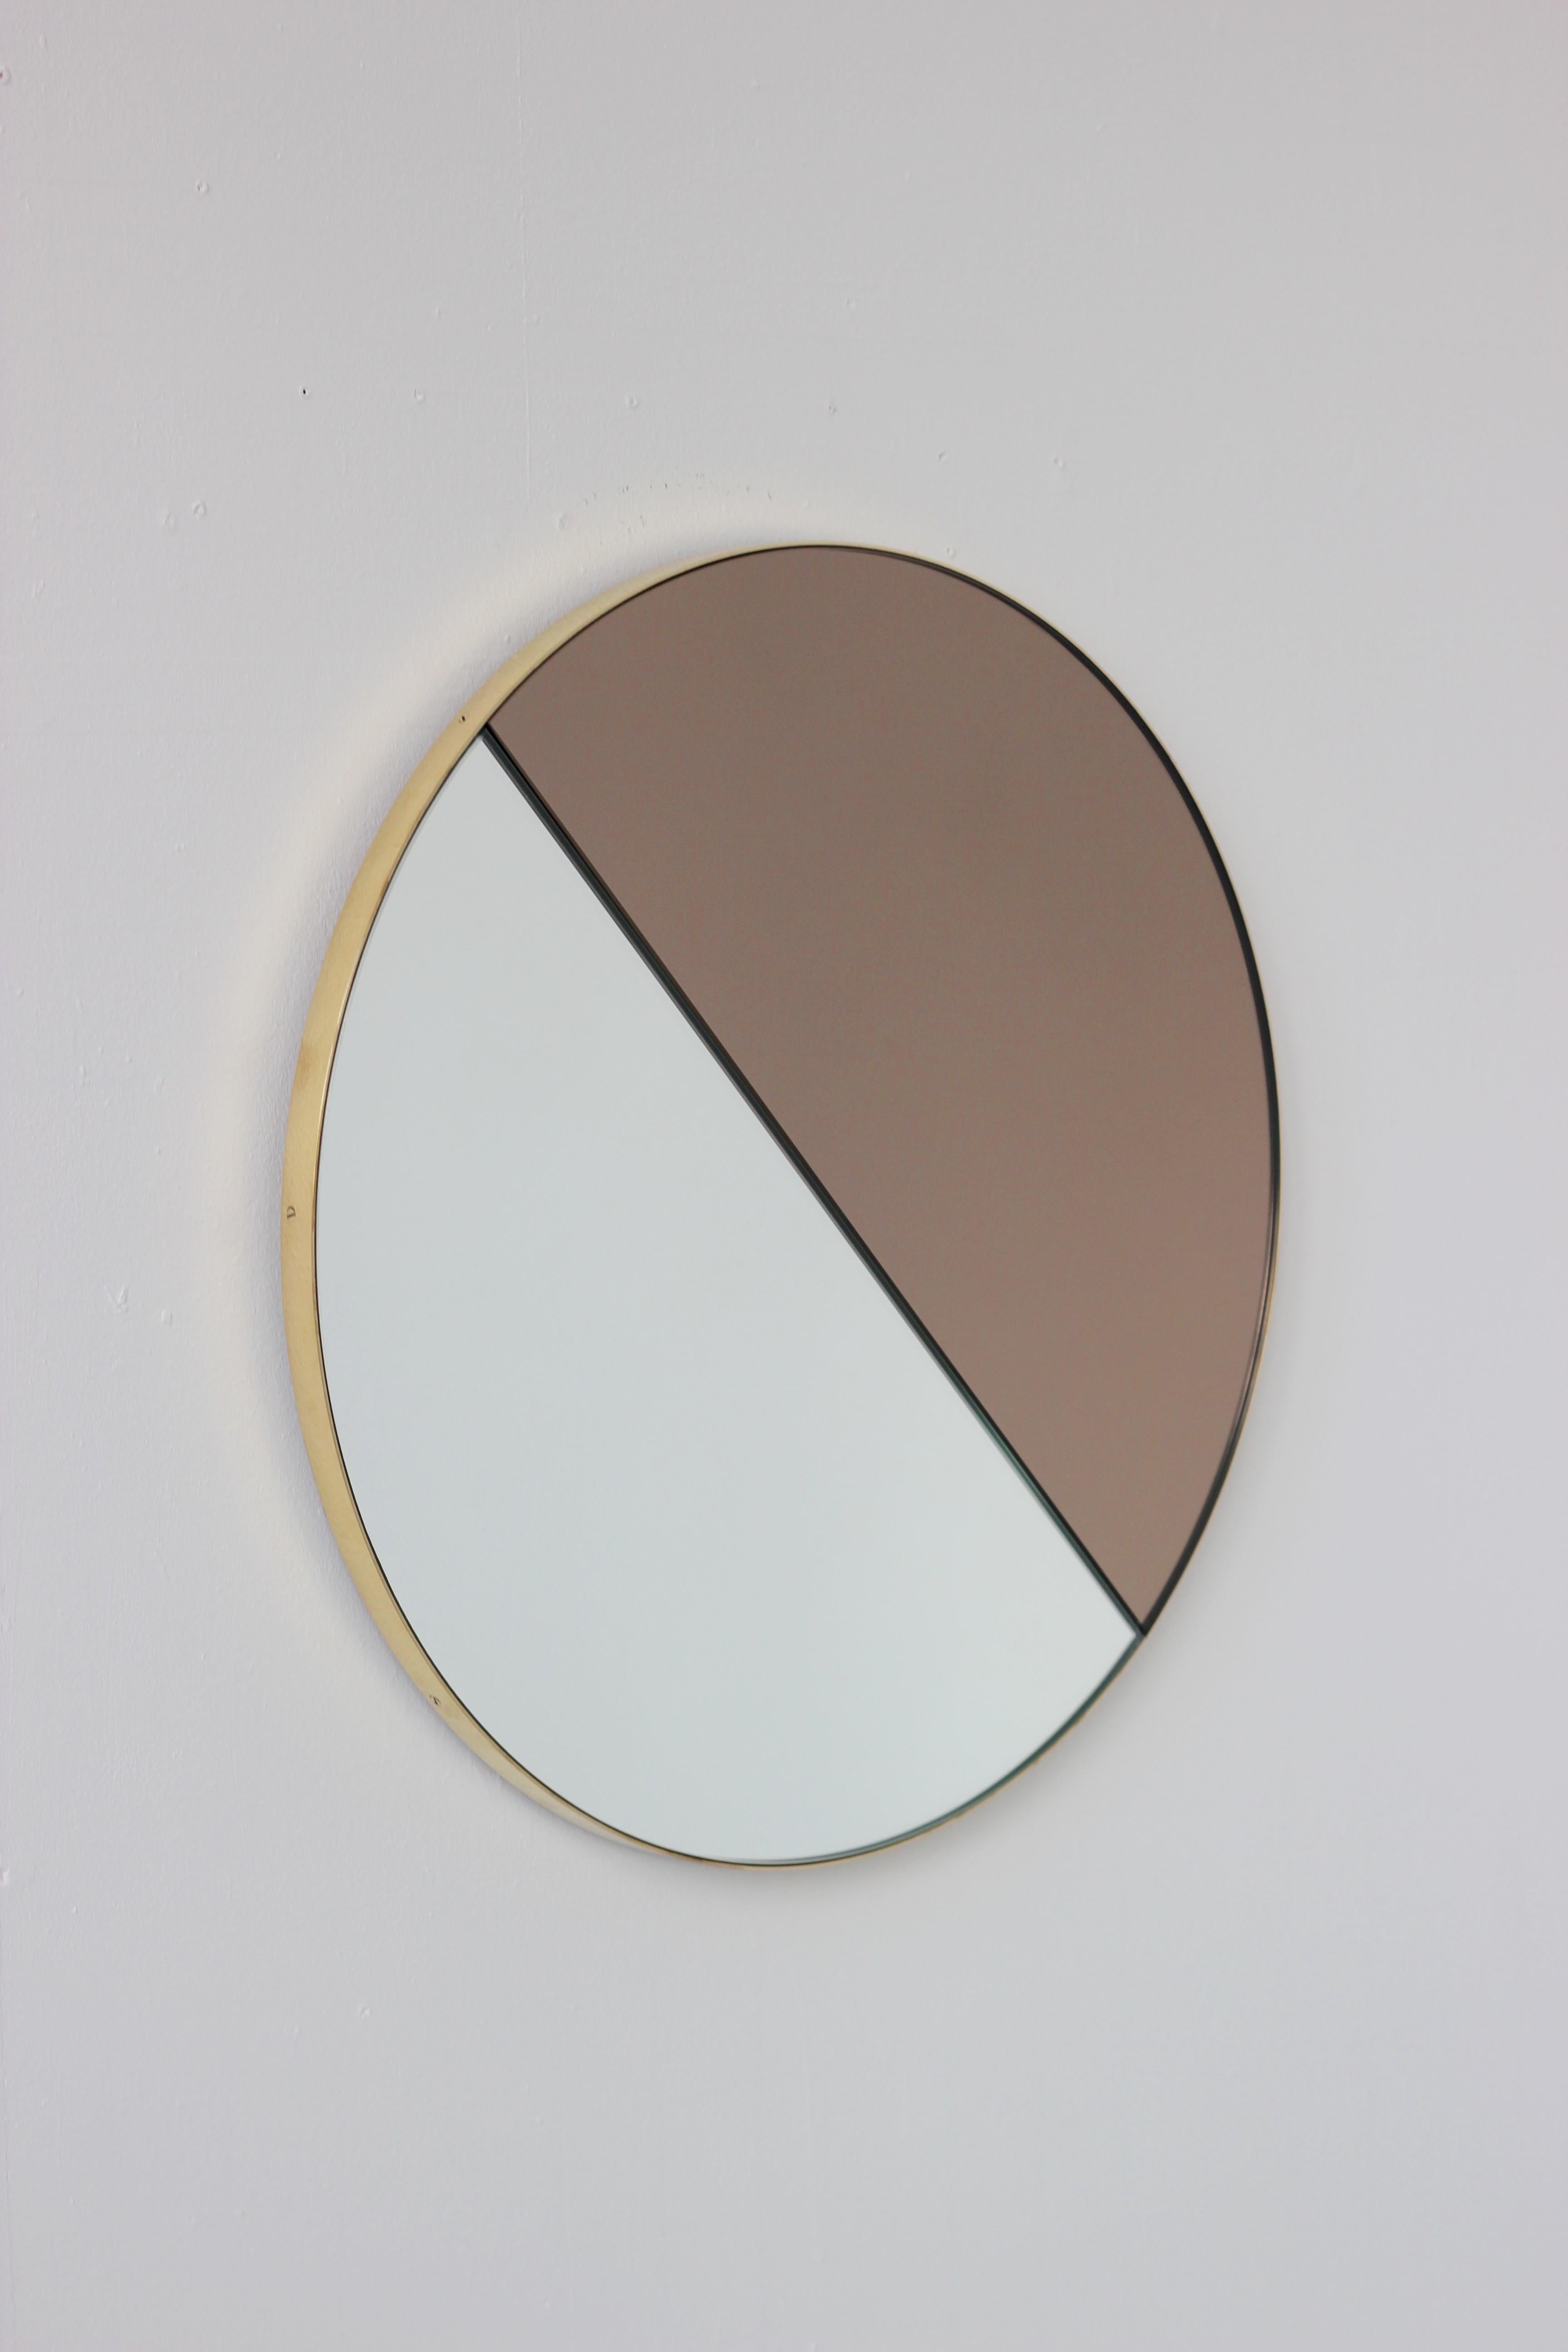 Orbis Dualis Mixed Tinted Silver and Bronze Round Mirror with Brass Frame, XL In New Condition For Sale In London, GB